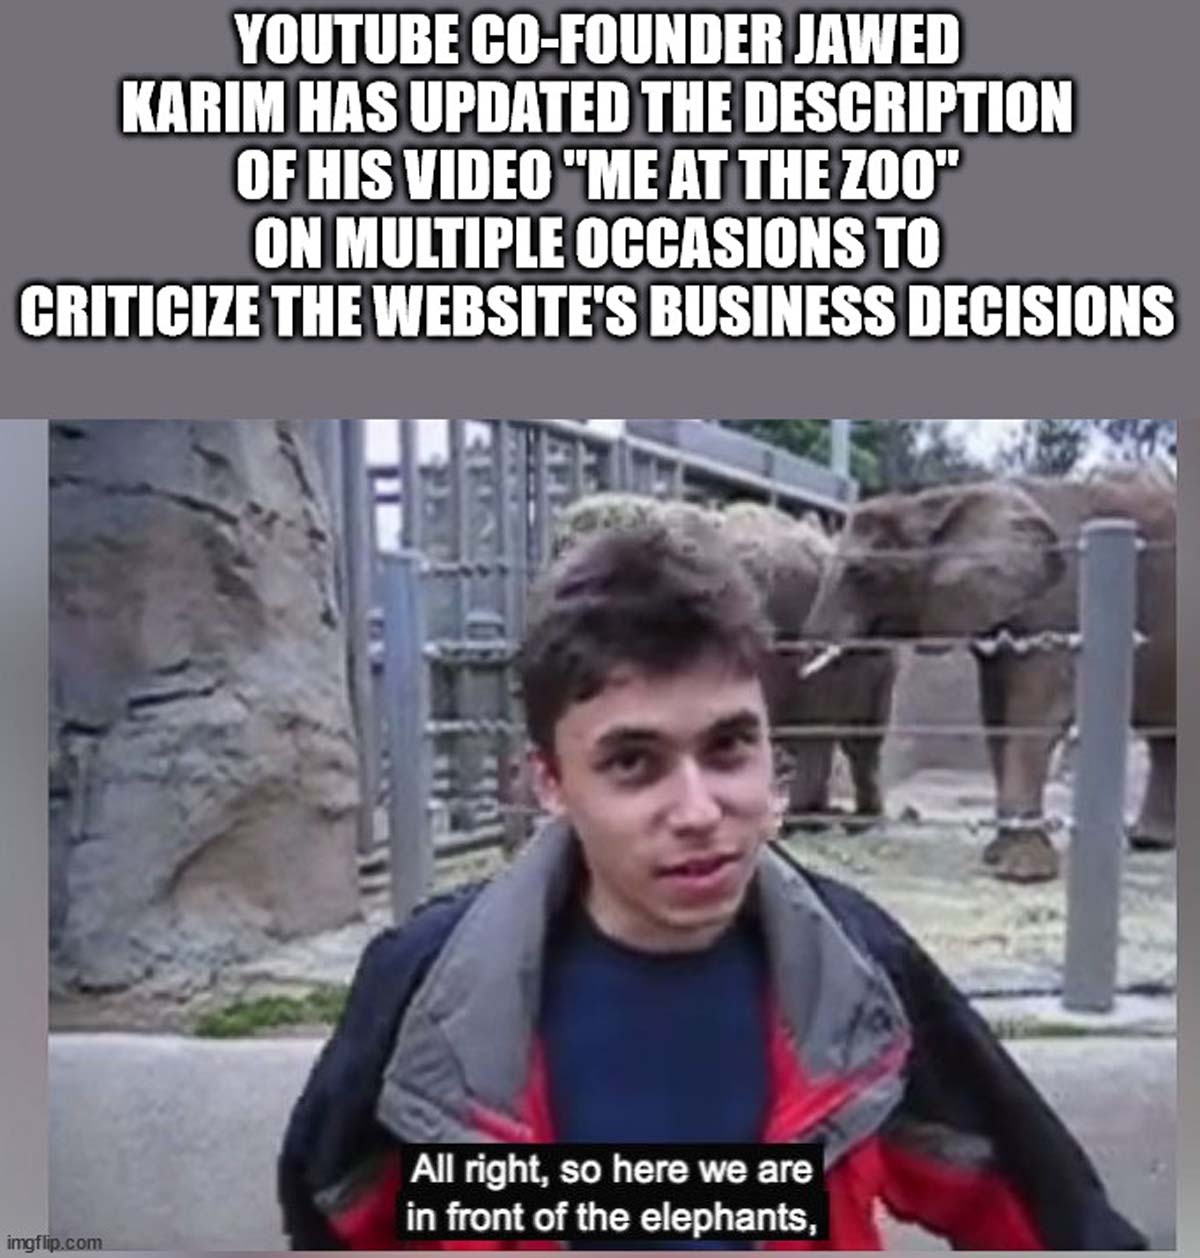 first youtuber - Youtube CoFounder Jawed Karim Has Updated The Description Of His Video "Me At The Zoo" On Multiple Occasions To Criticize The Website'S Business Decisions imgflip.com All right, so here we are in front of the elephants,